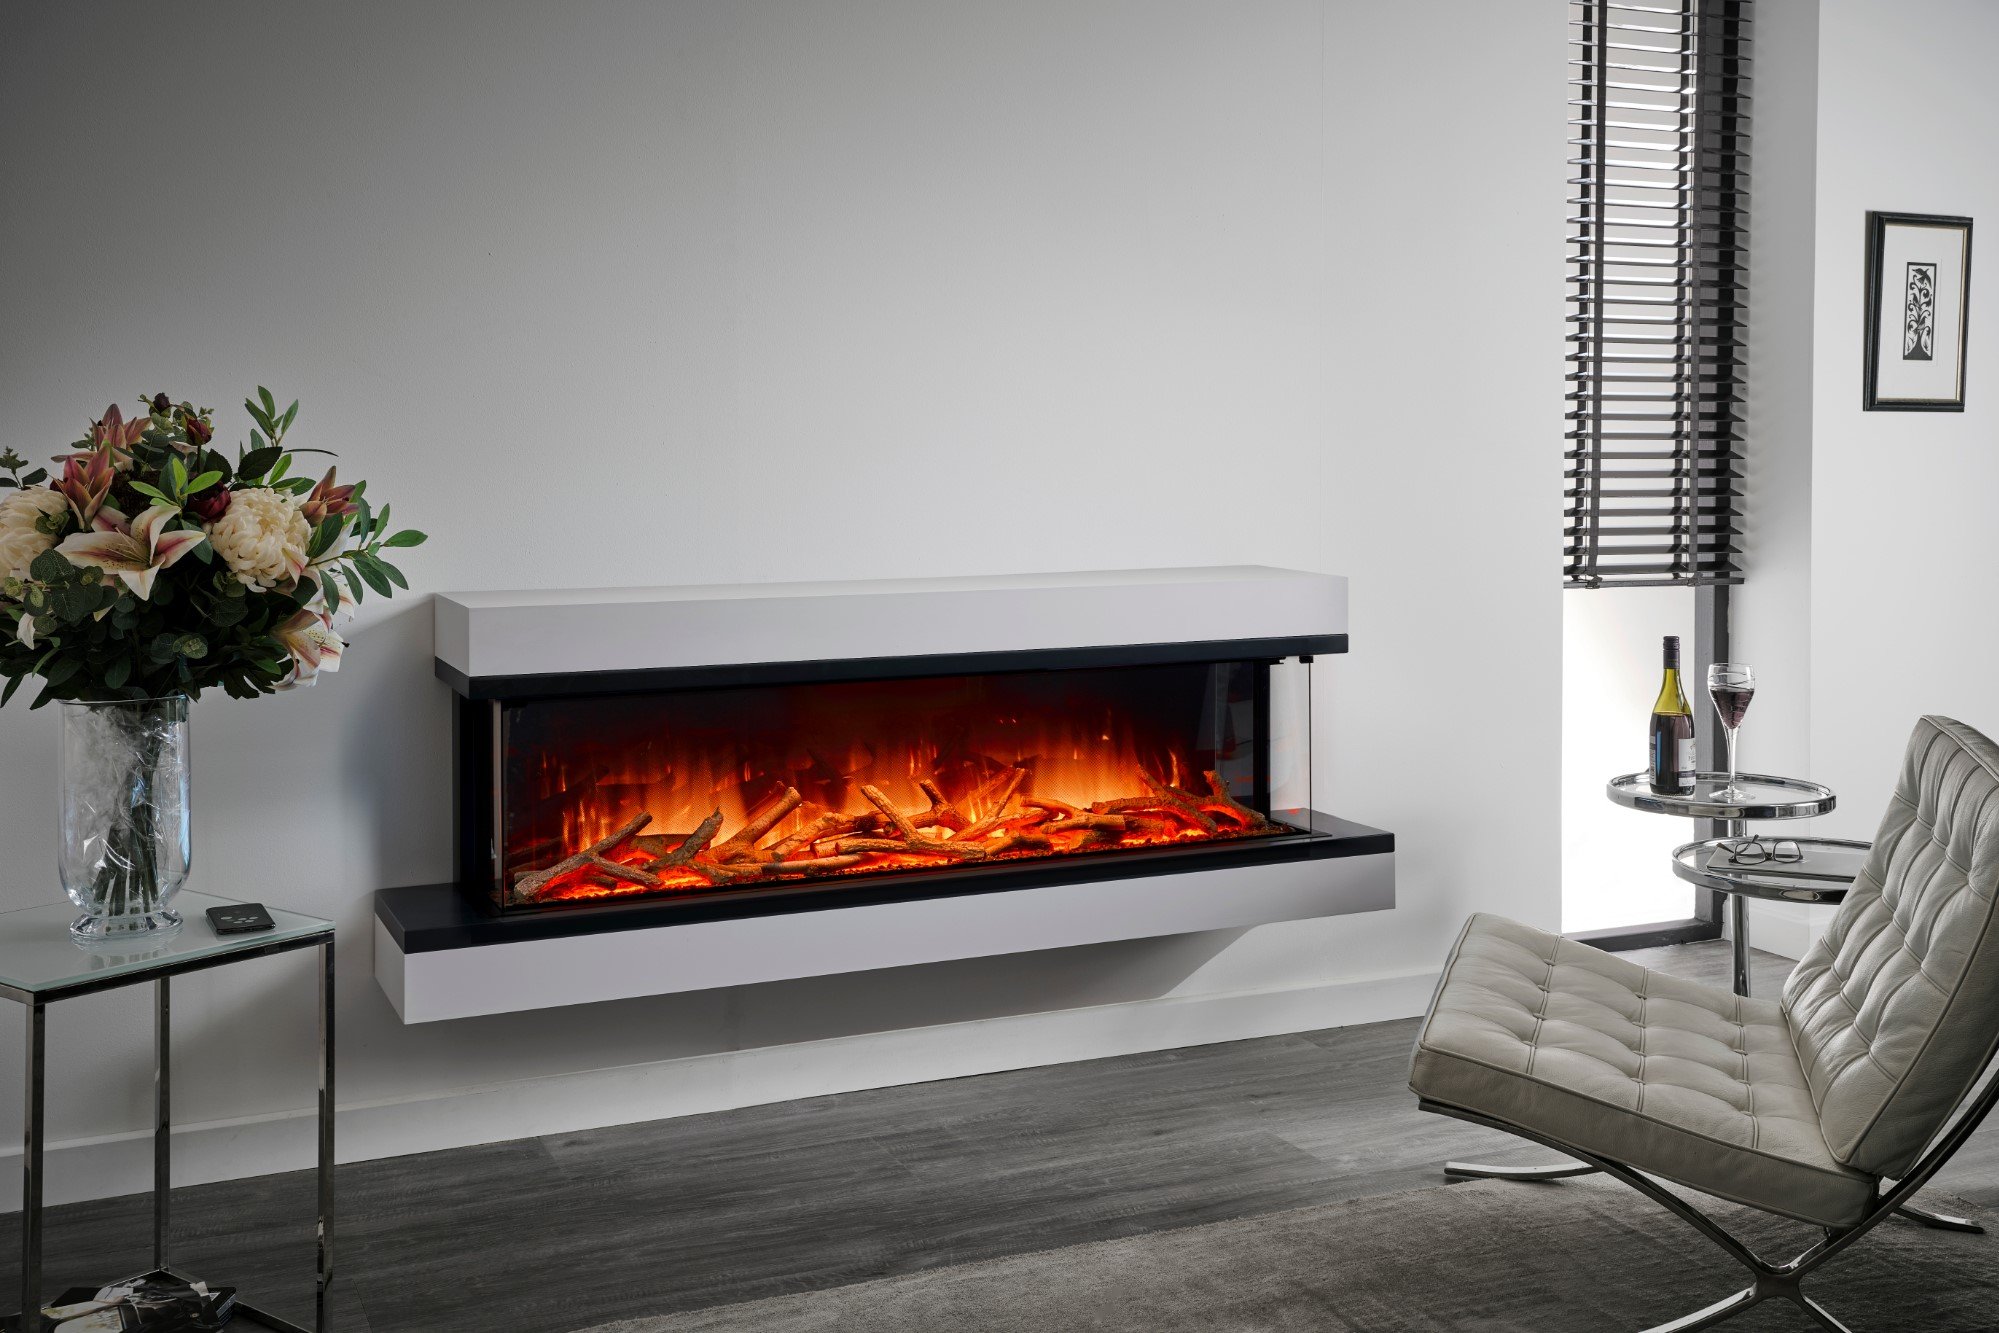 What Types of Fires Can You Use in a Media Wall?